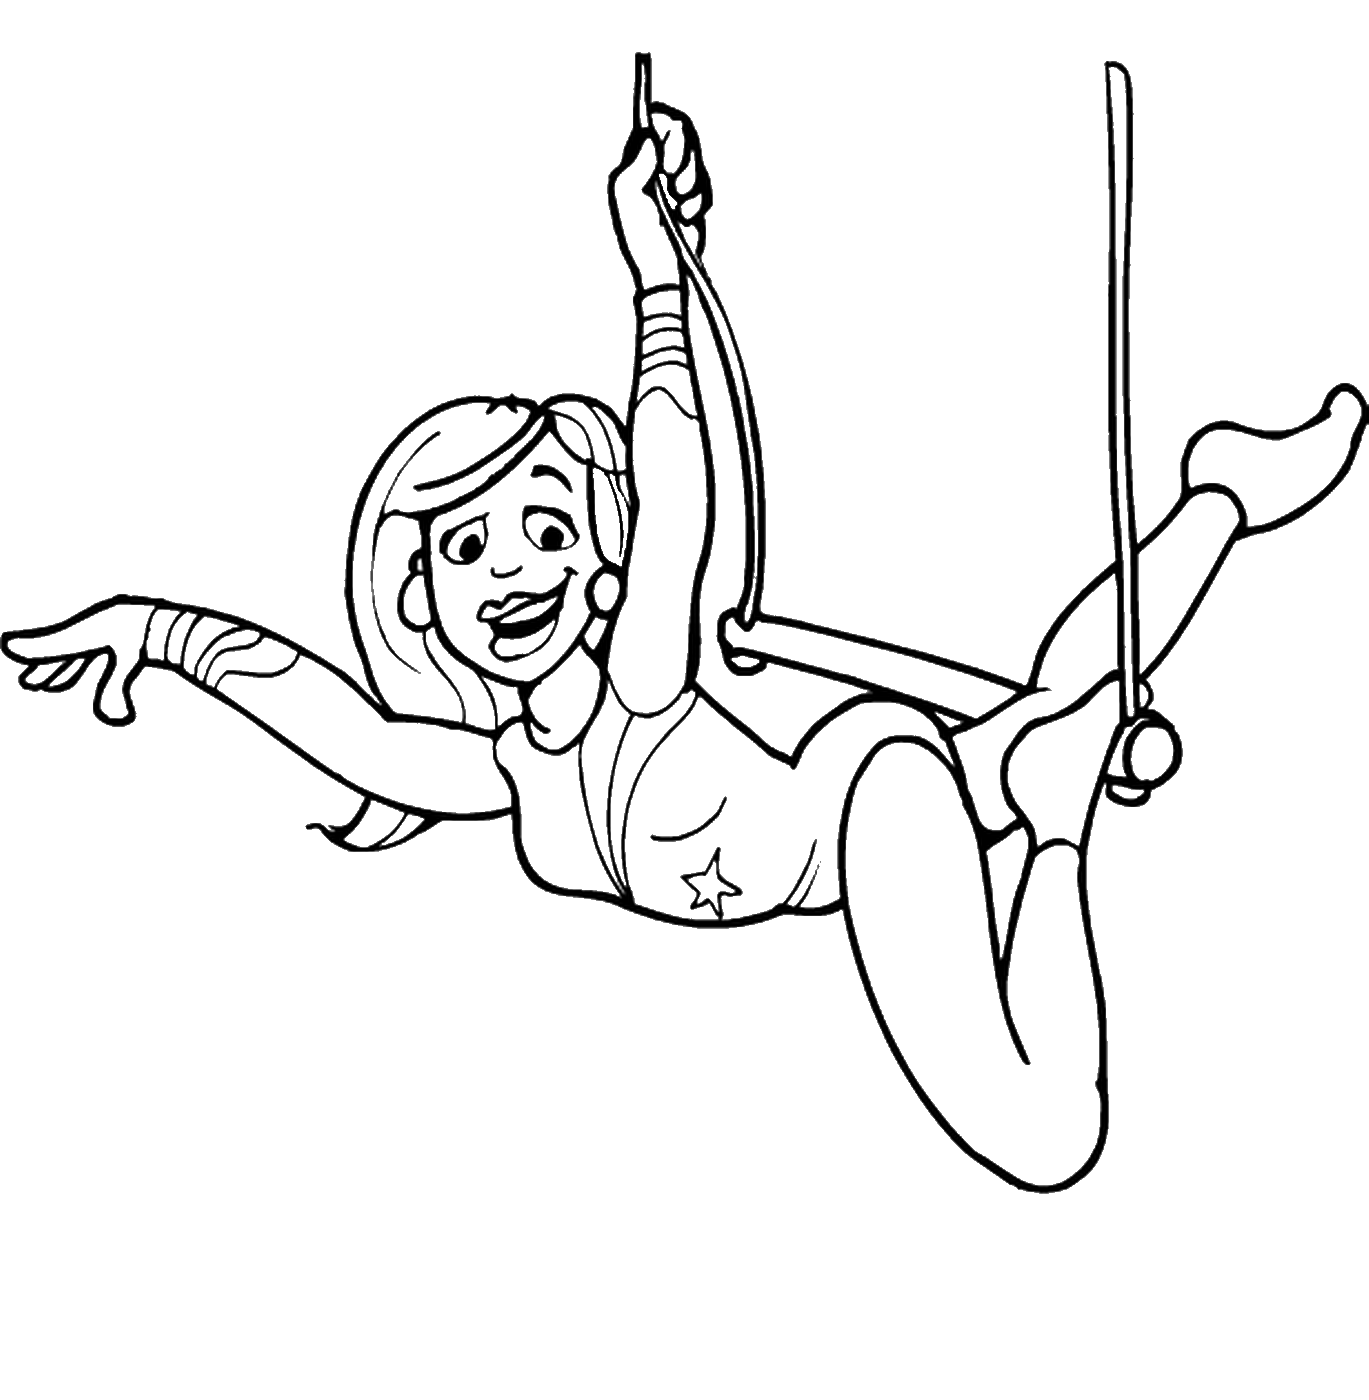 Circus Coloring Pages circus_18 Printable 2021 1543 Coloring4free